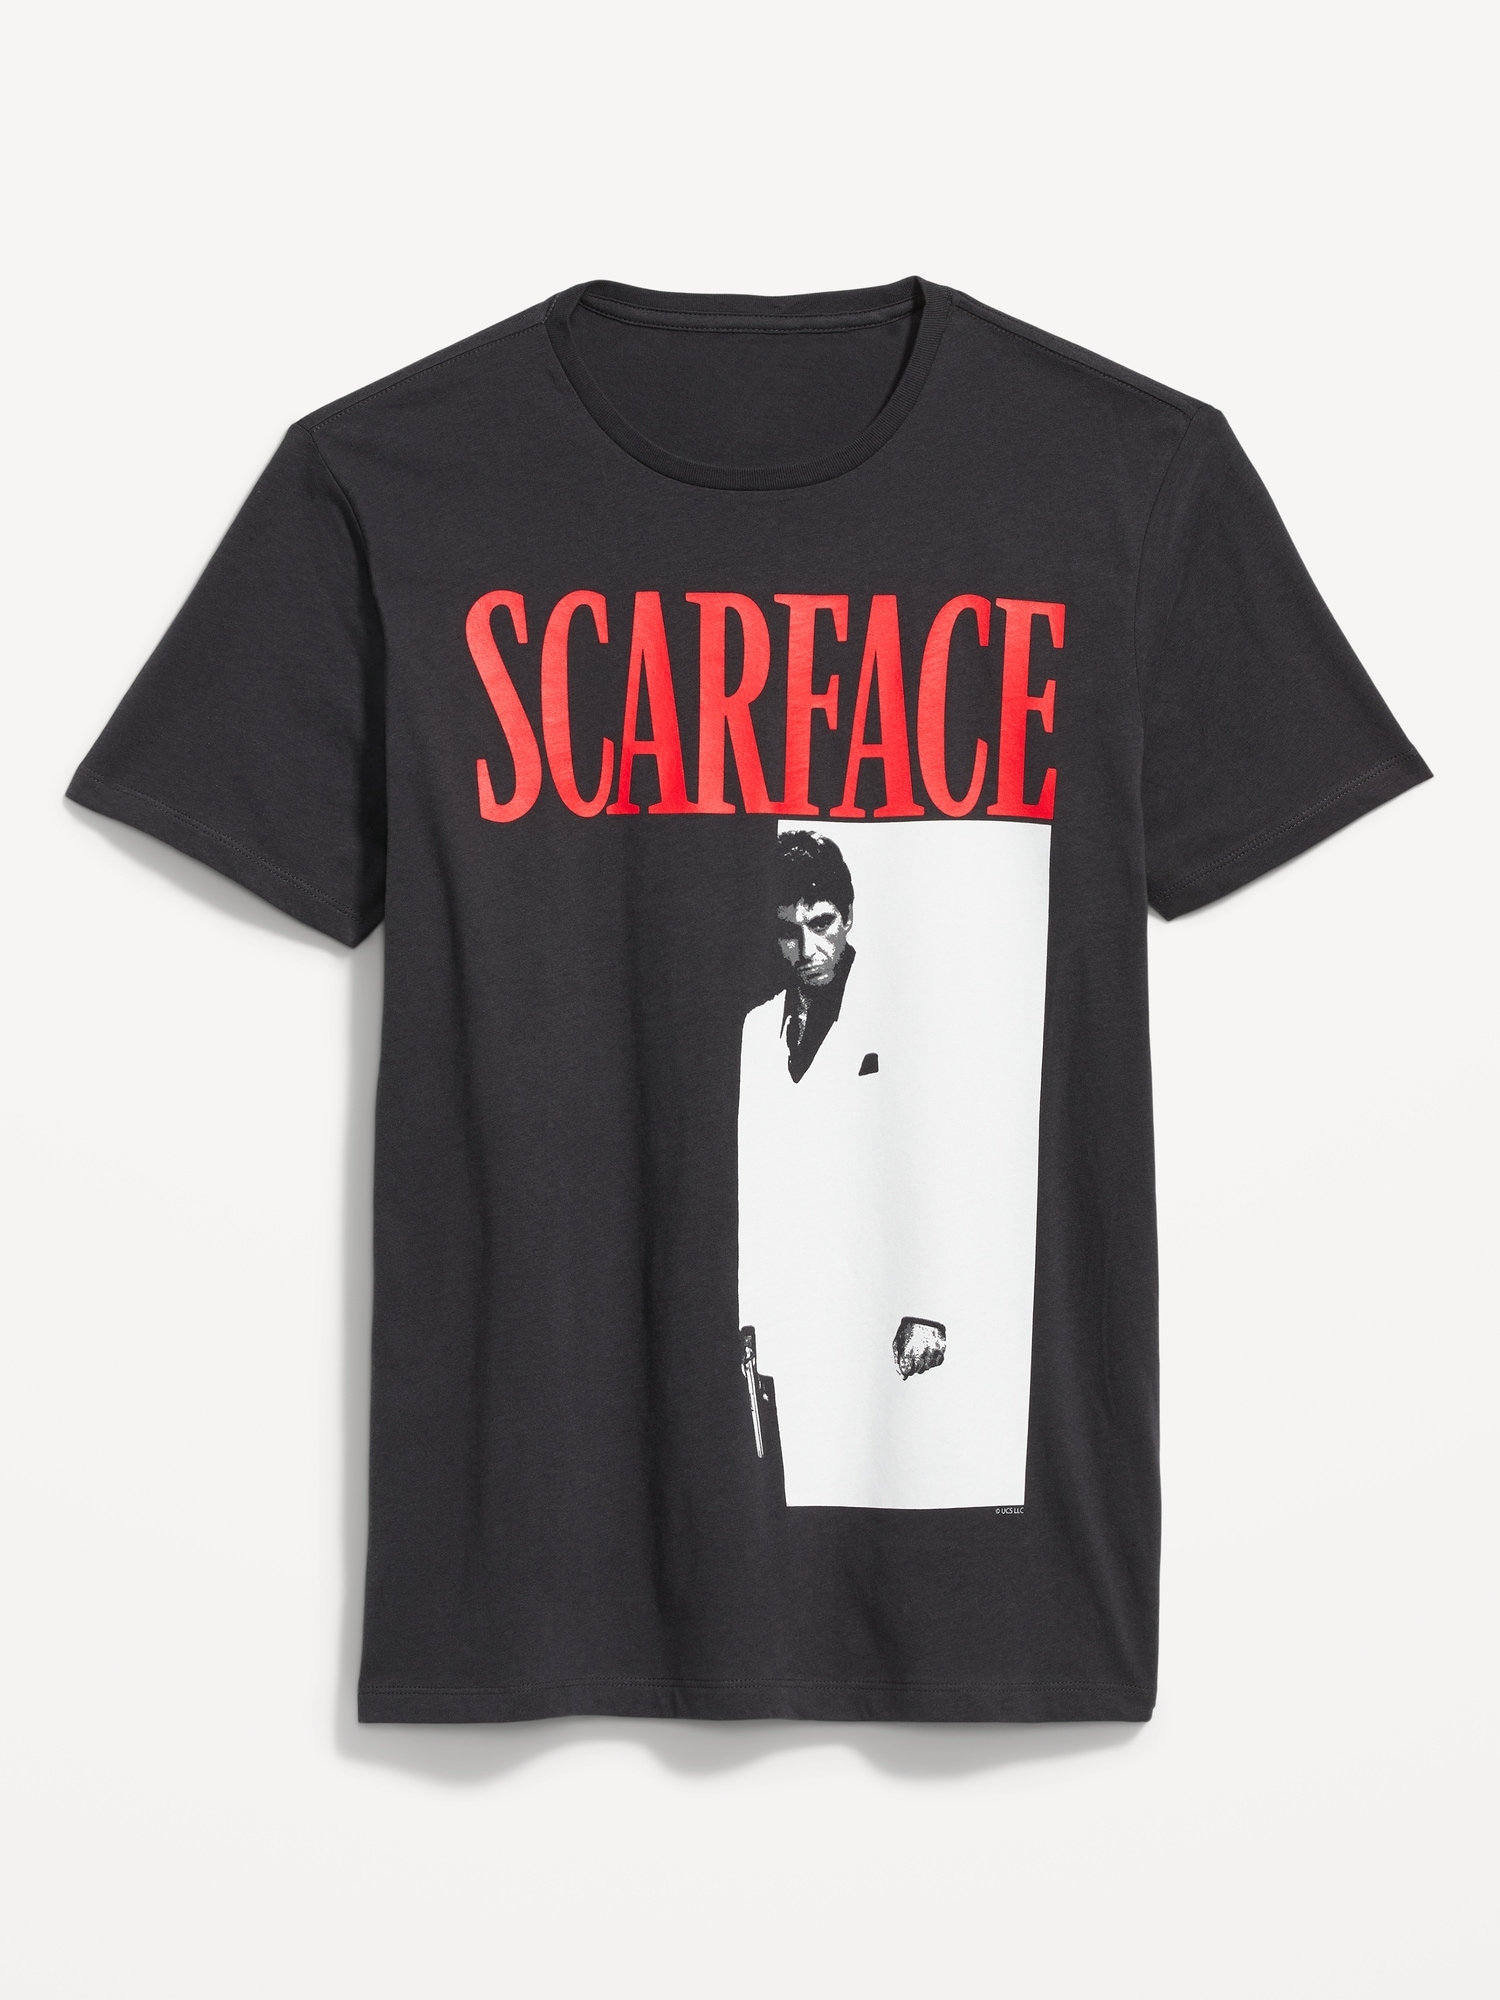 Scarface™ Gender-Neutral T-Shirt for Adults